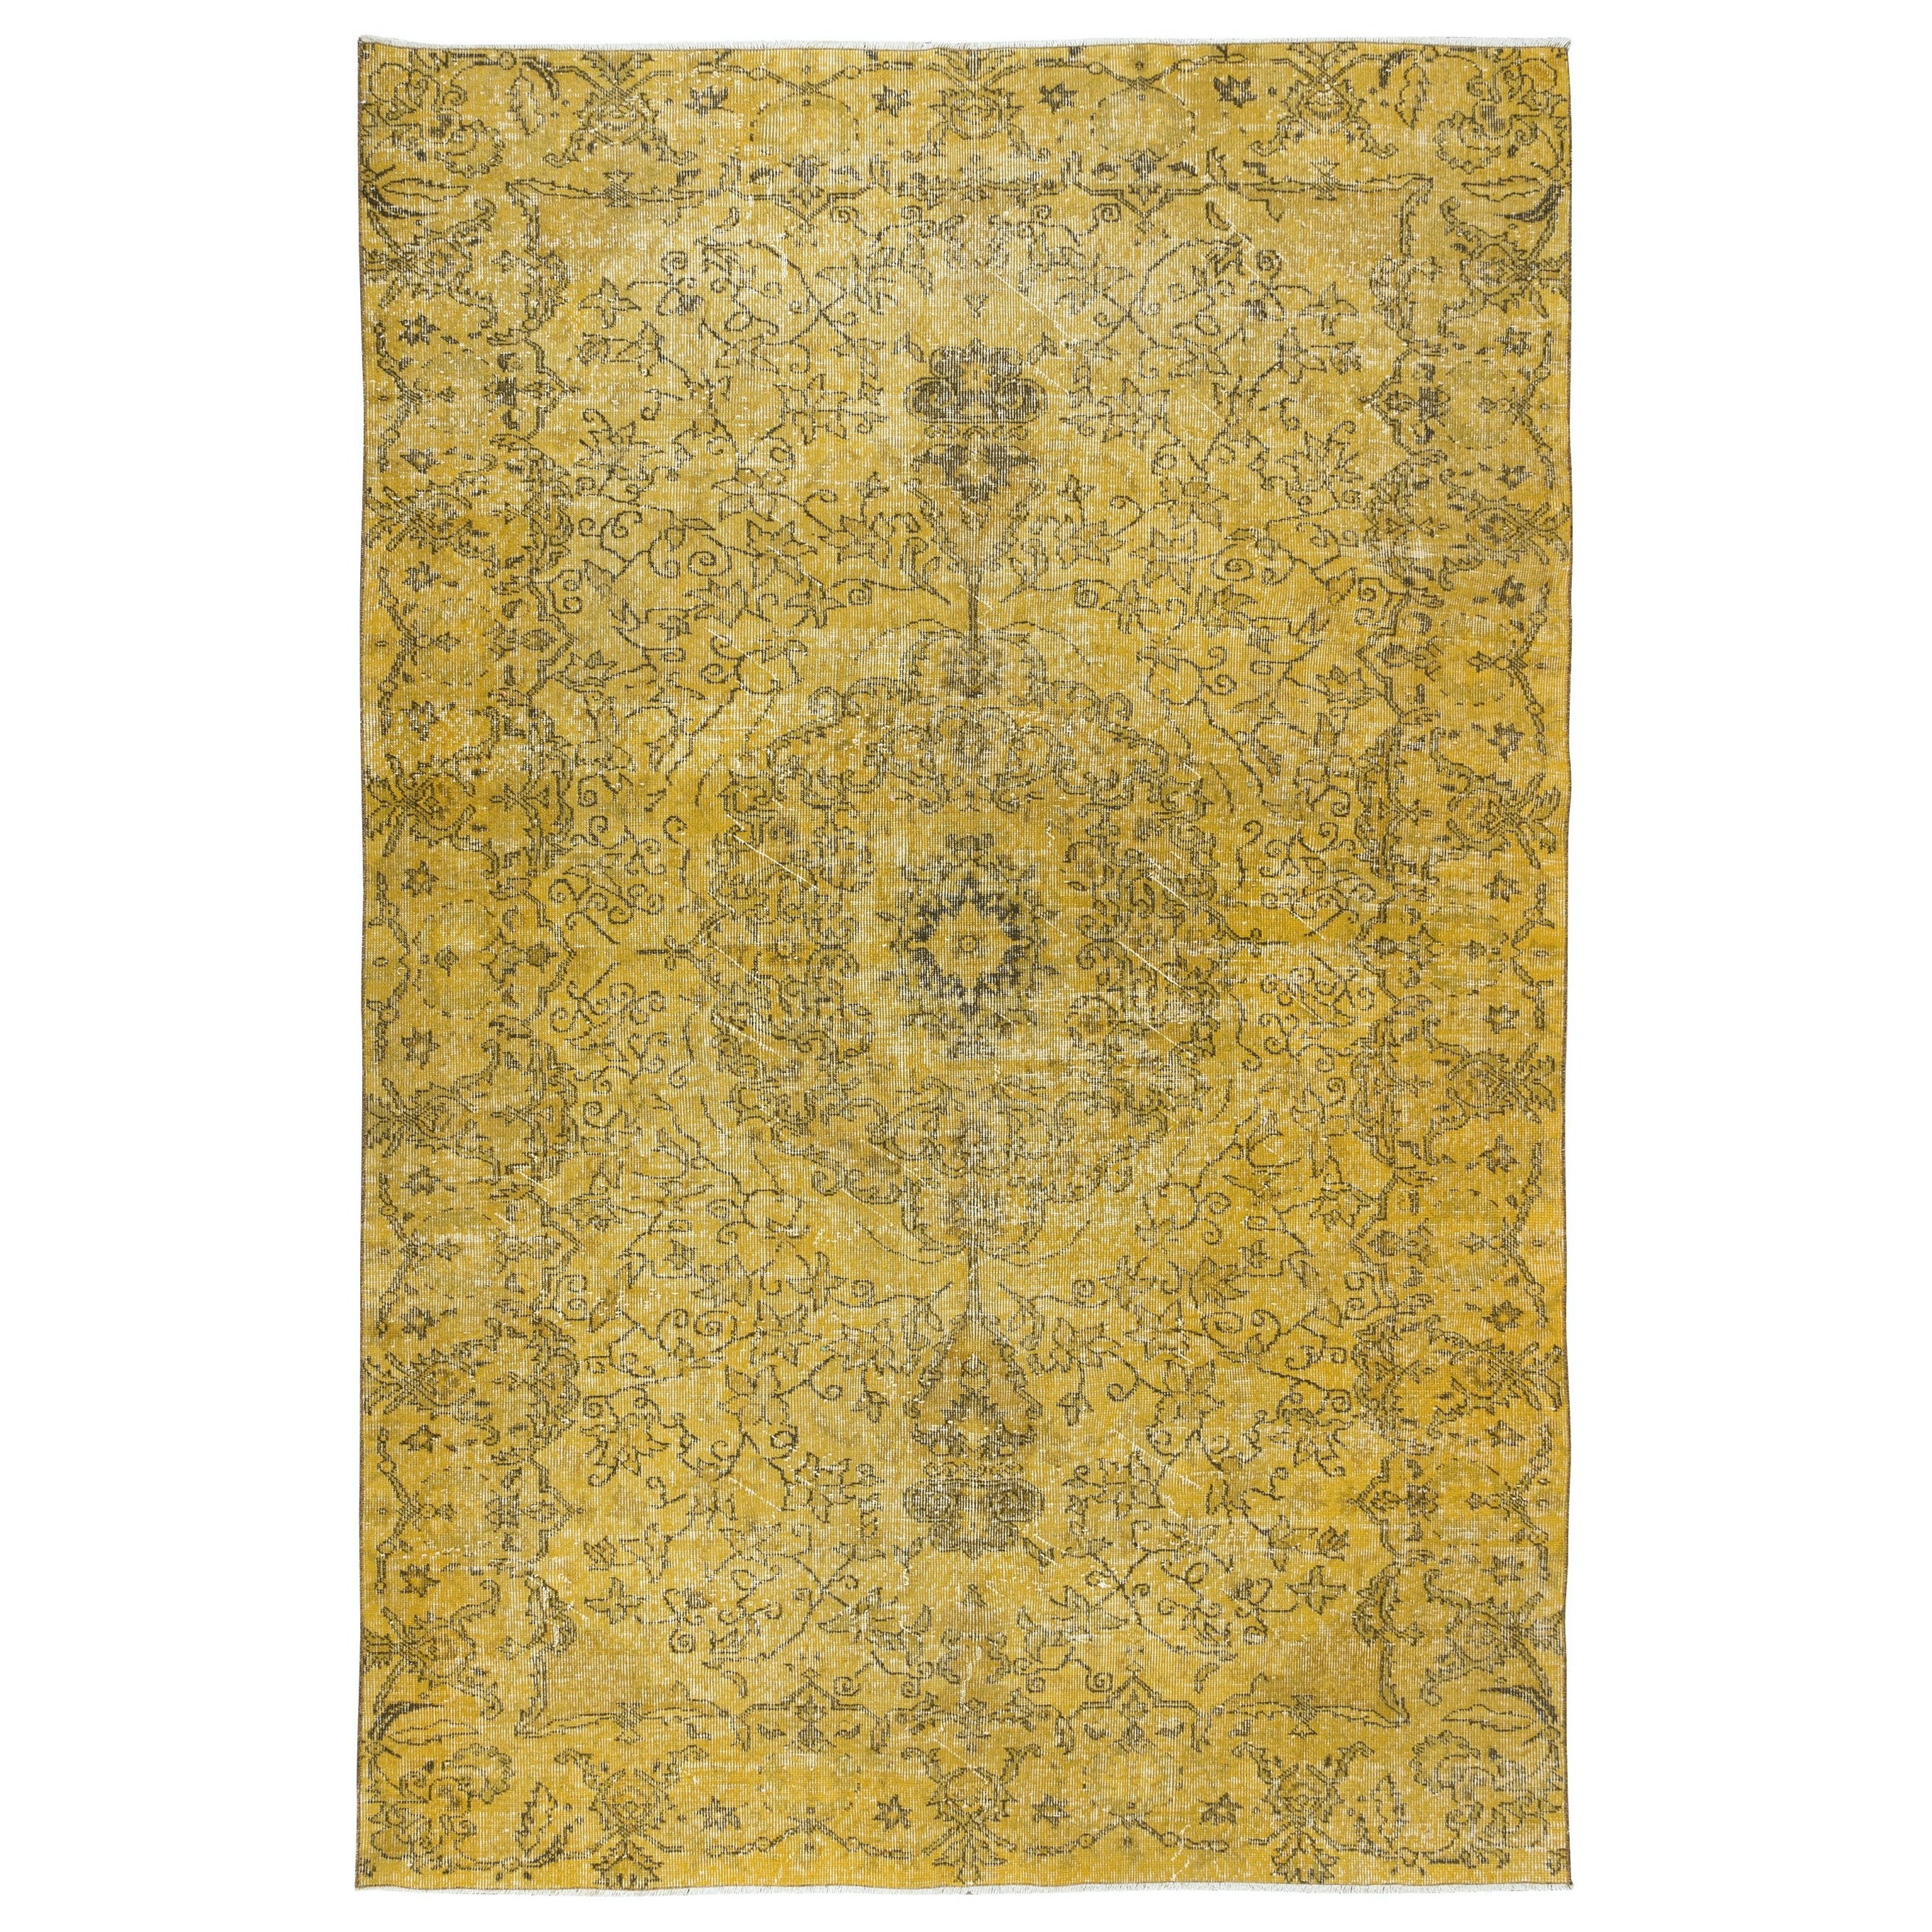 6.4x9.4 Ft Handmade Turkish Area Rug in Yellow, Ideal for Contemporary Interiors For Sale